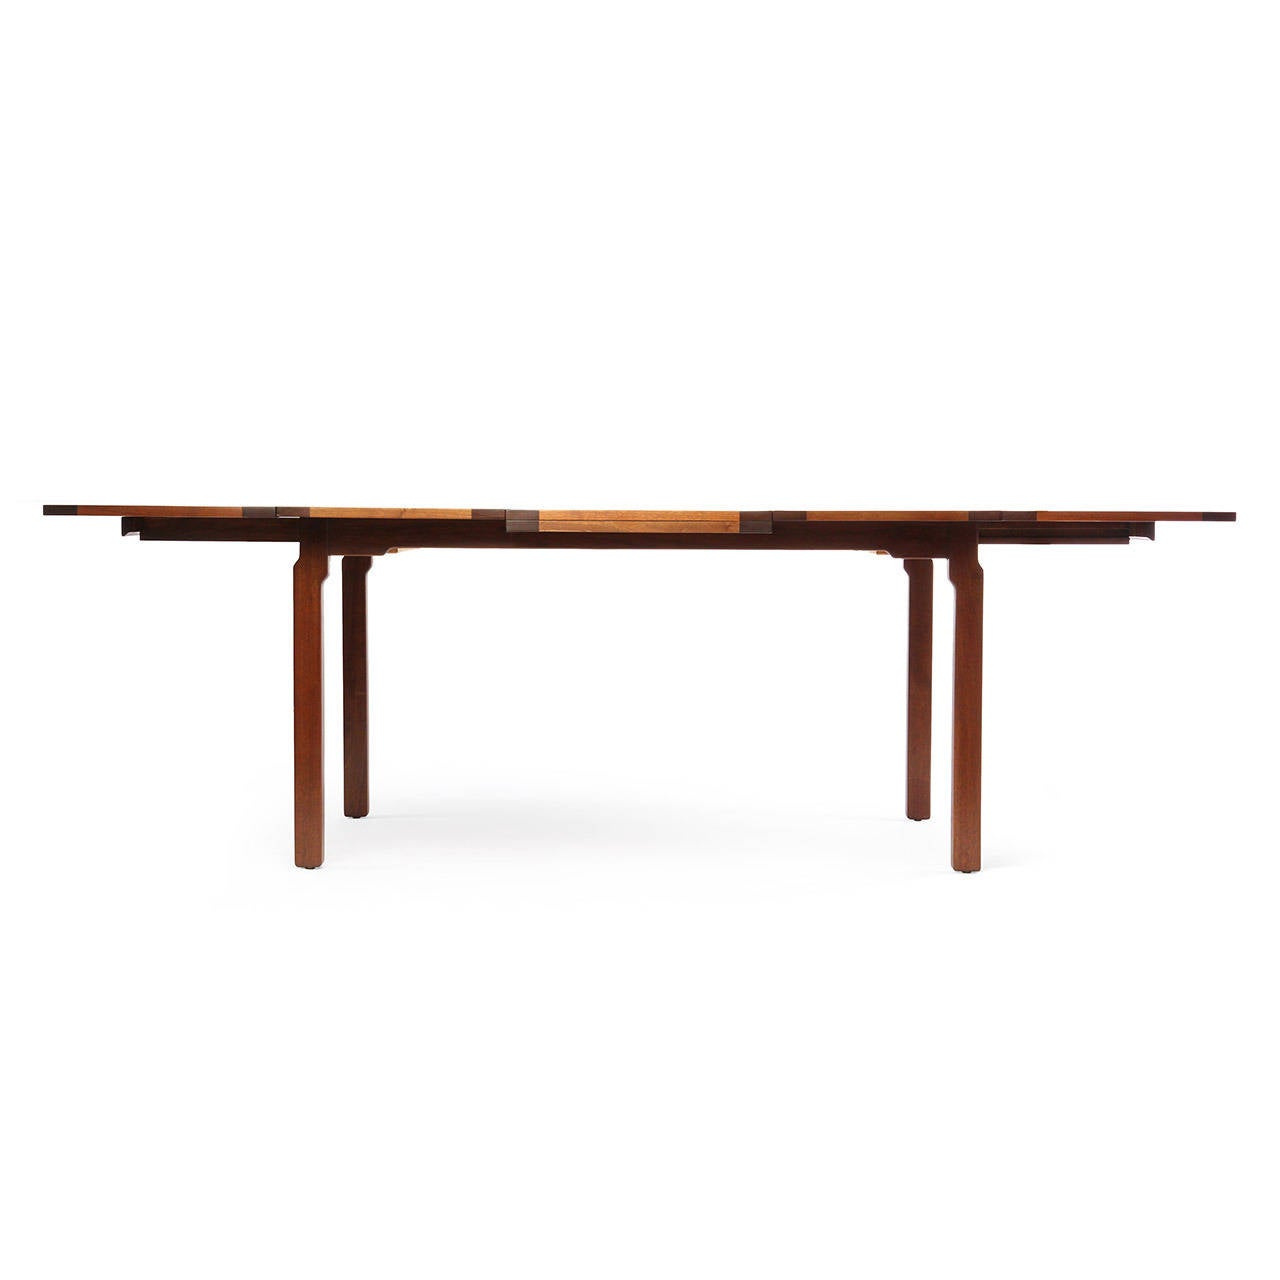 A superbly detailed and impeccably crafted expandable Arts & Crafts-influenced dining table having a floating top fashioned of contrasting pegged planks of bleached and natural walnut resting on an exposed shaped walnut base.